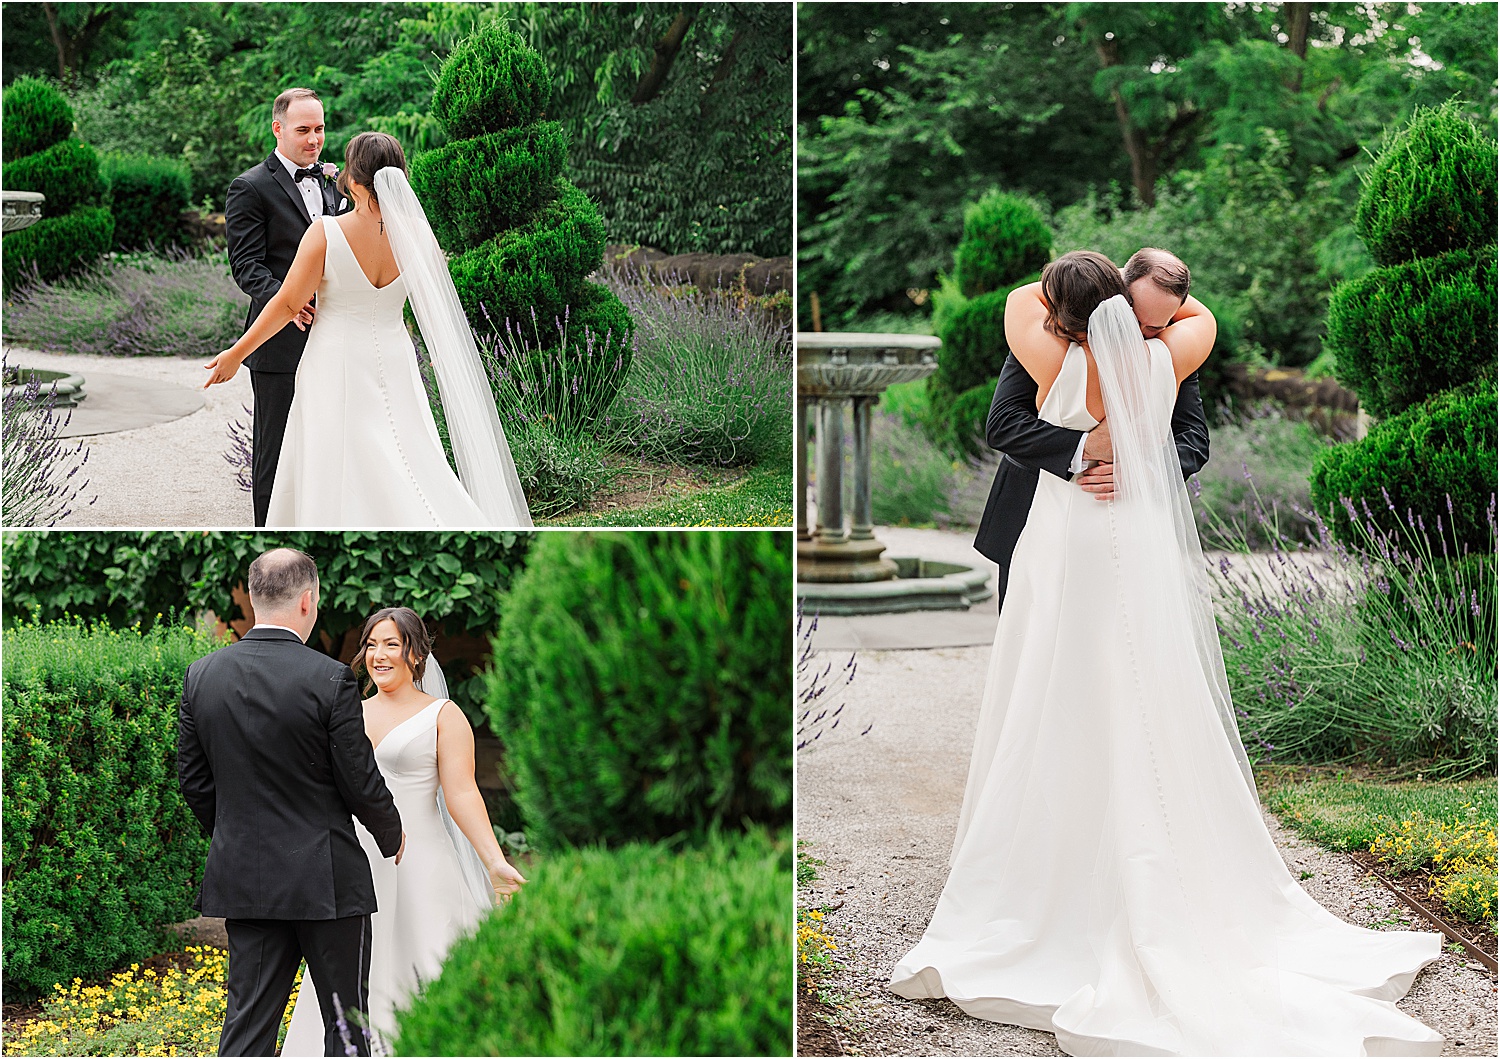 first look wedding • Wild Weather - Love at a Phipps Conservatory Outdoor Garden Wedding